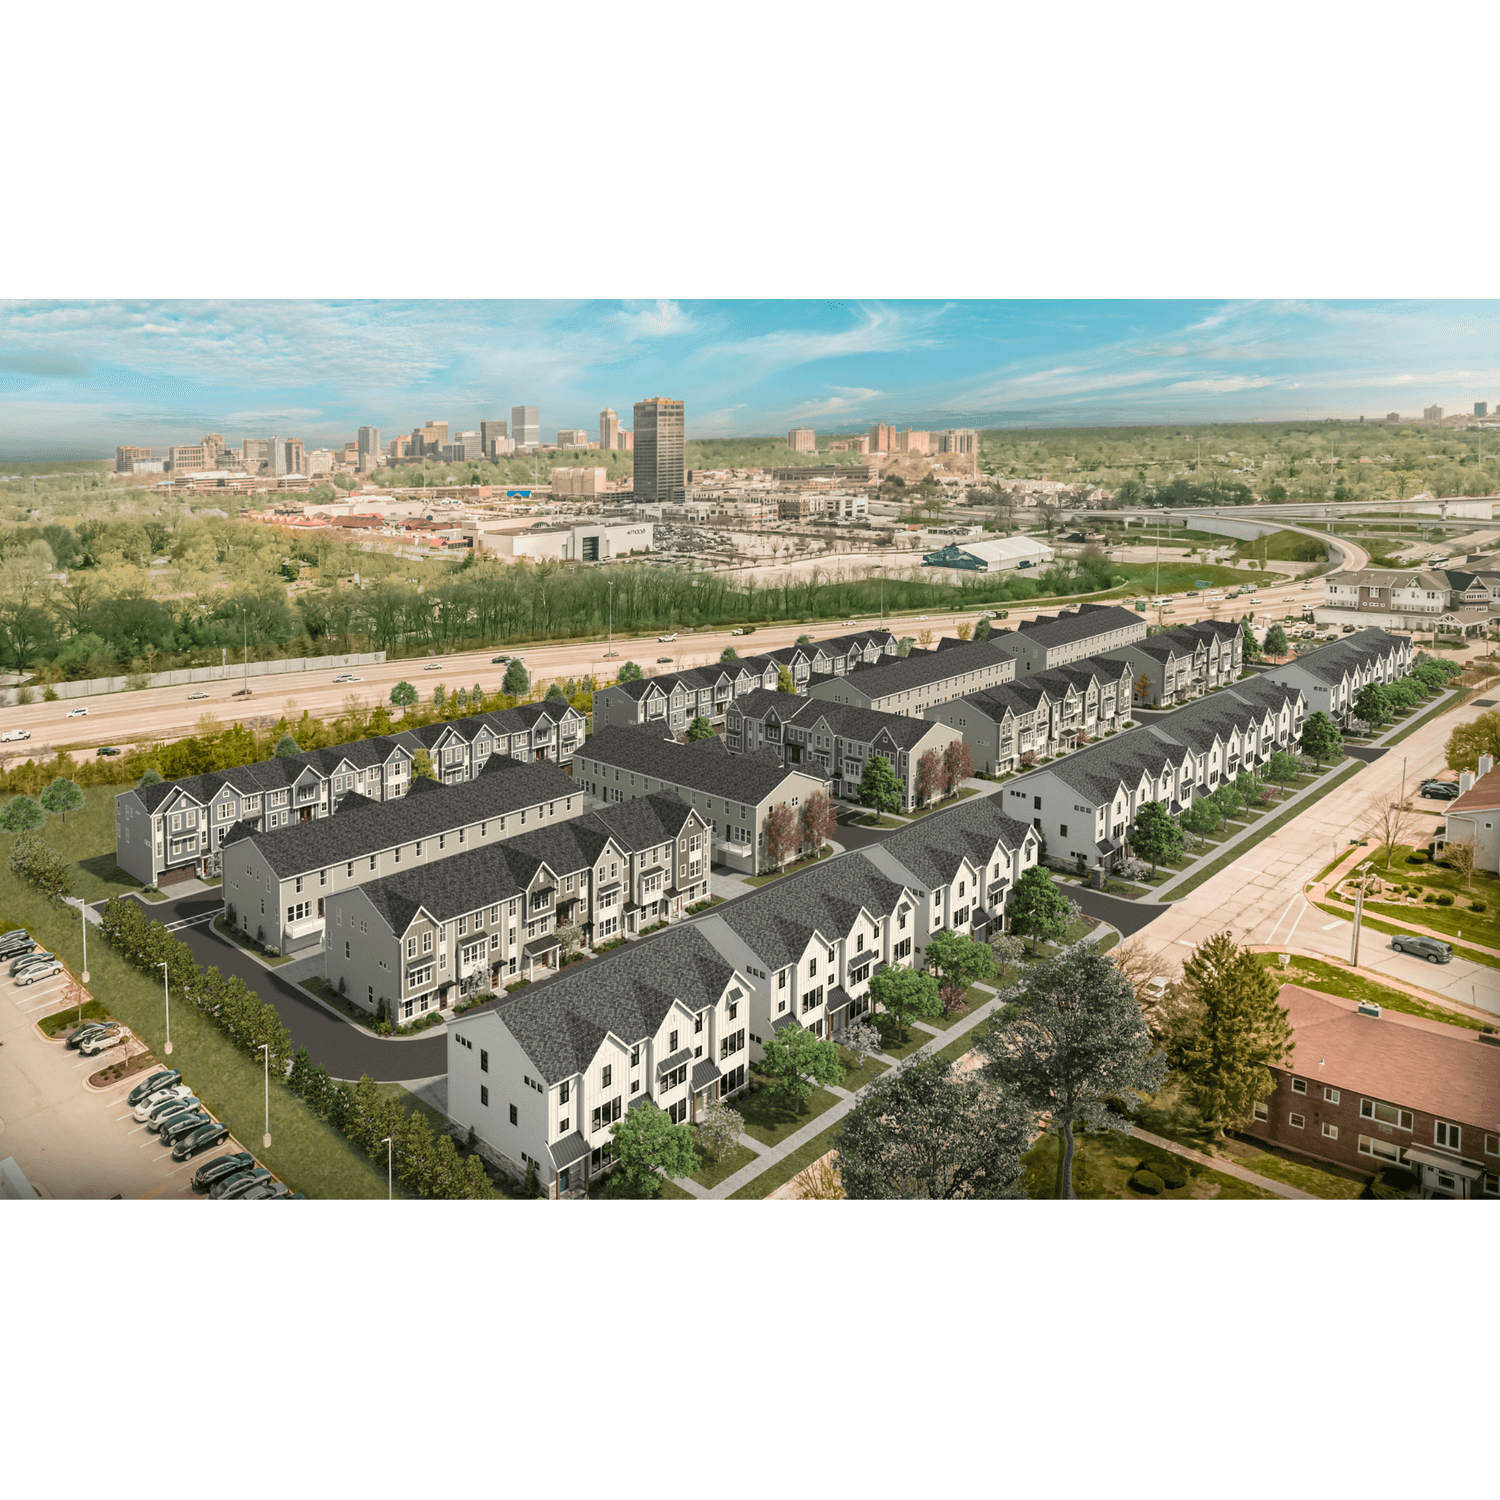 2. Gateway Heights xây dựng tại Eager Road, St. Louis, MO 63144